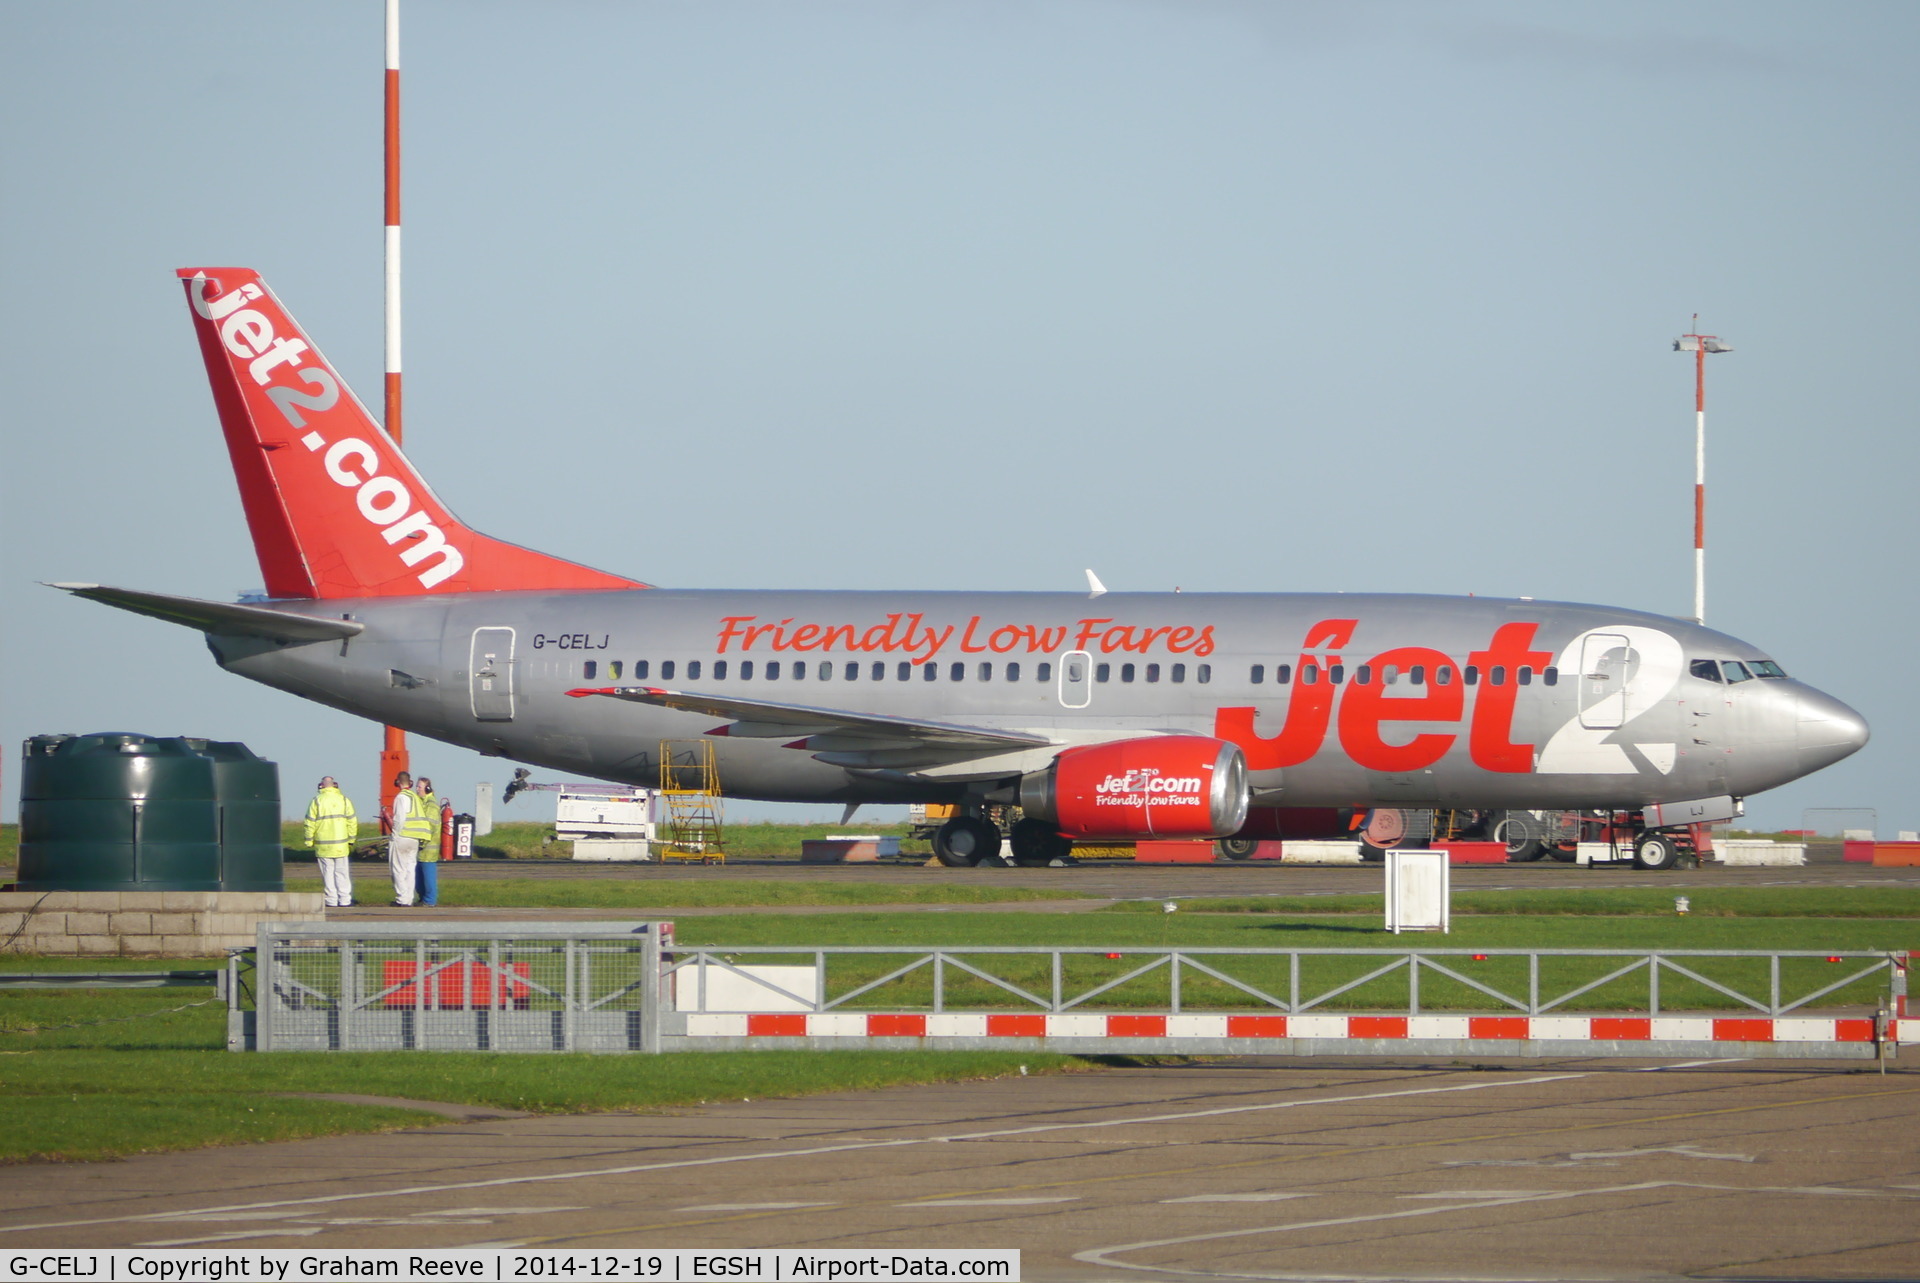 G-CELJ, 1986 Boeing 737-330 C/N 23529, Parked at Norwich.